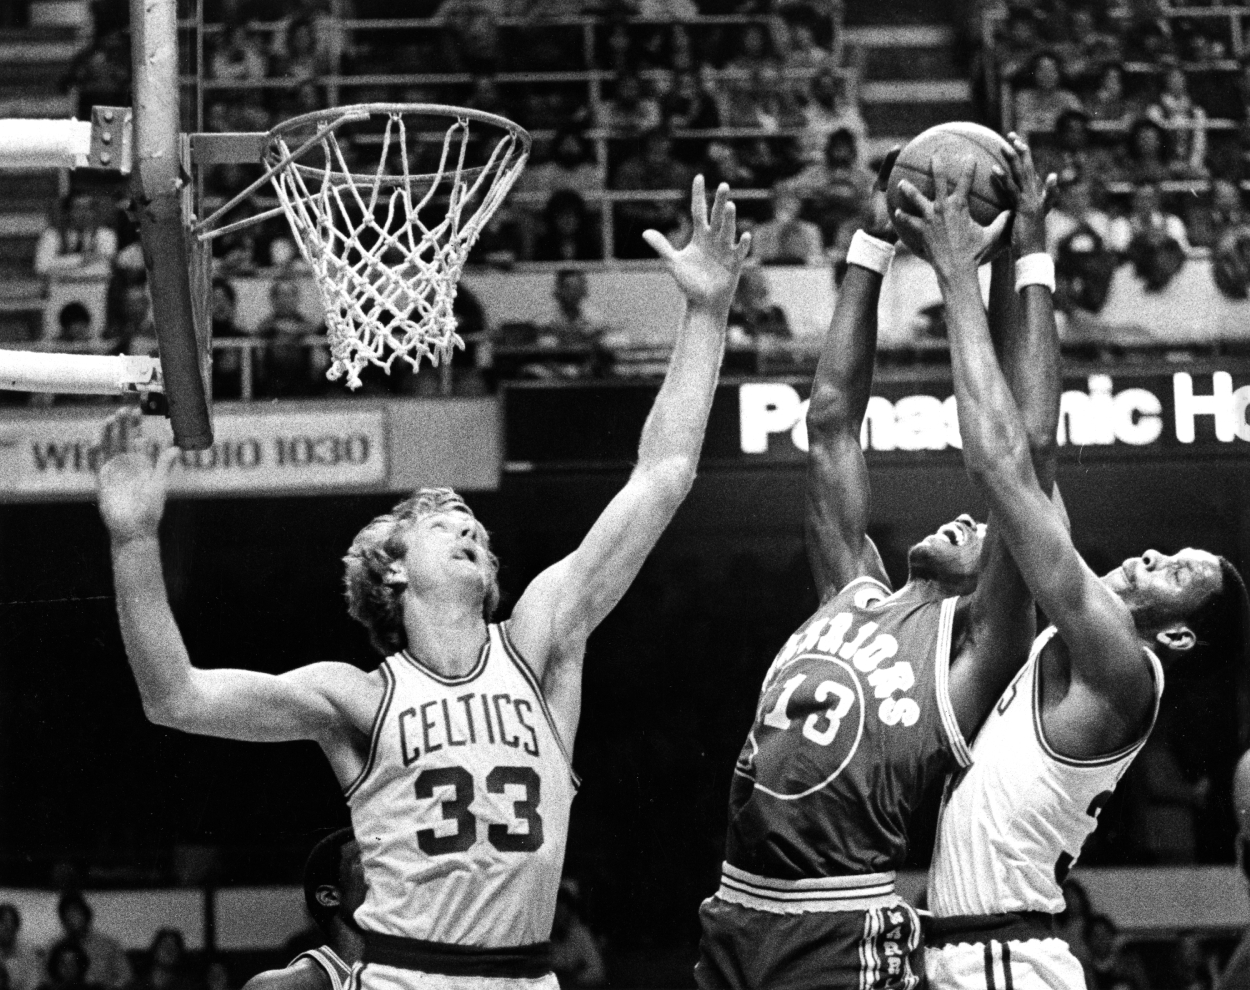 Boston Celtics' Larry Bird, left, and Cedric Maxwell, right, try to block a shot by the Warriors' Larry Smith.